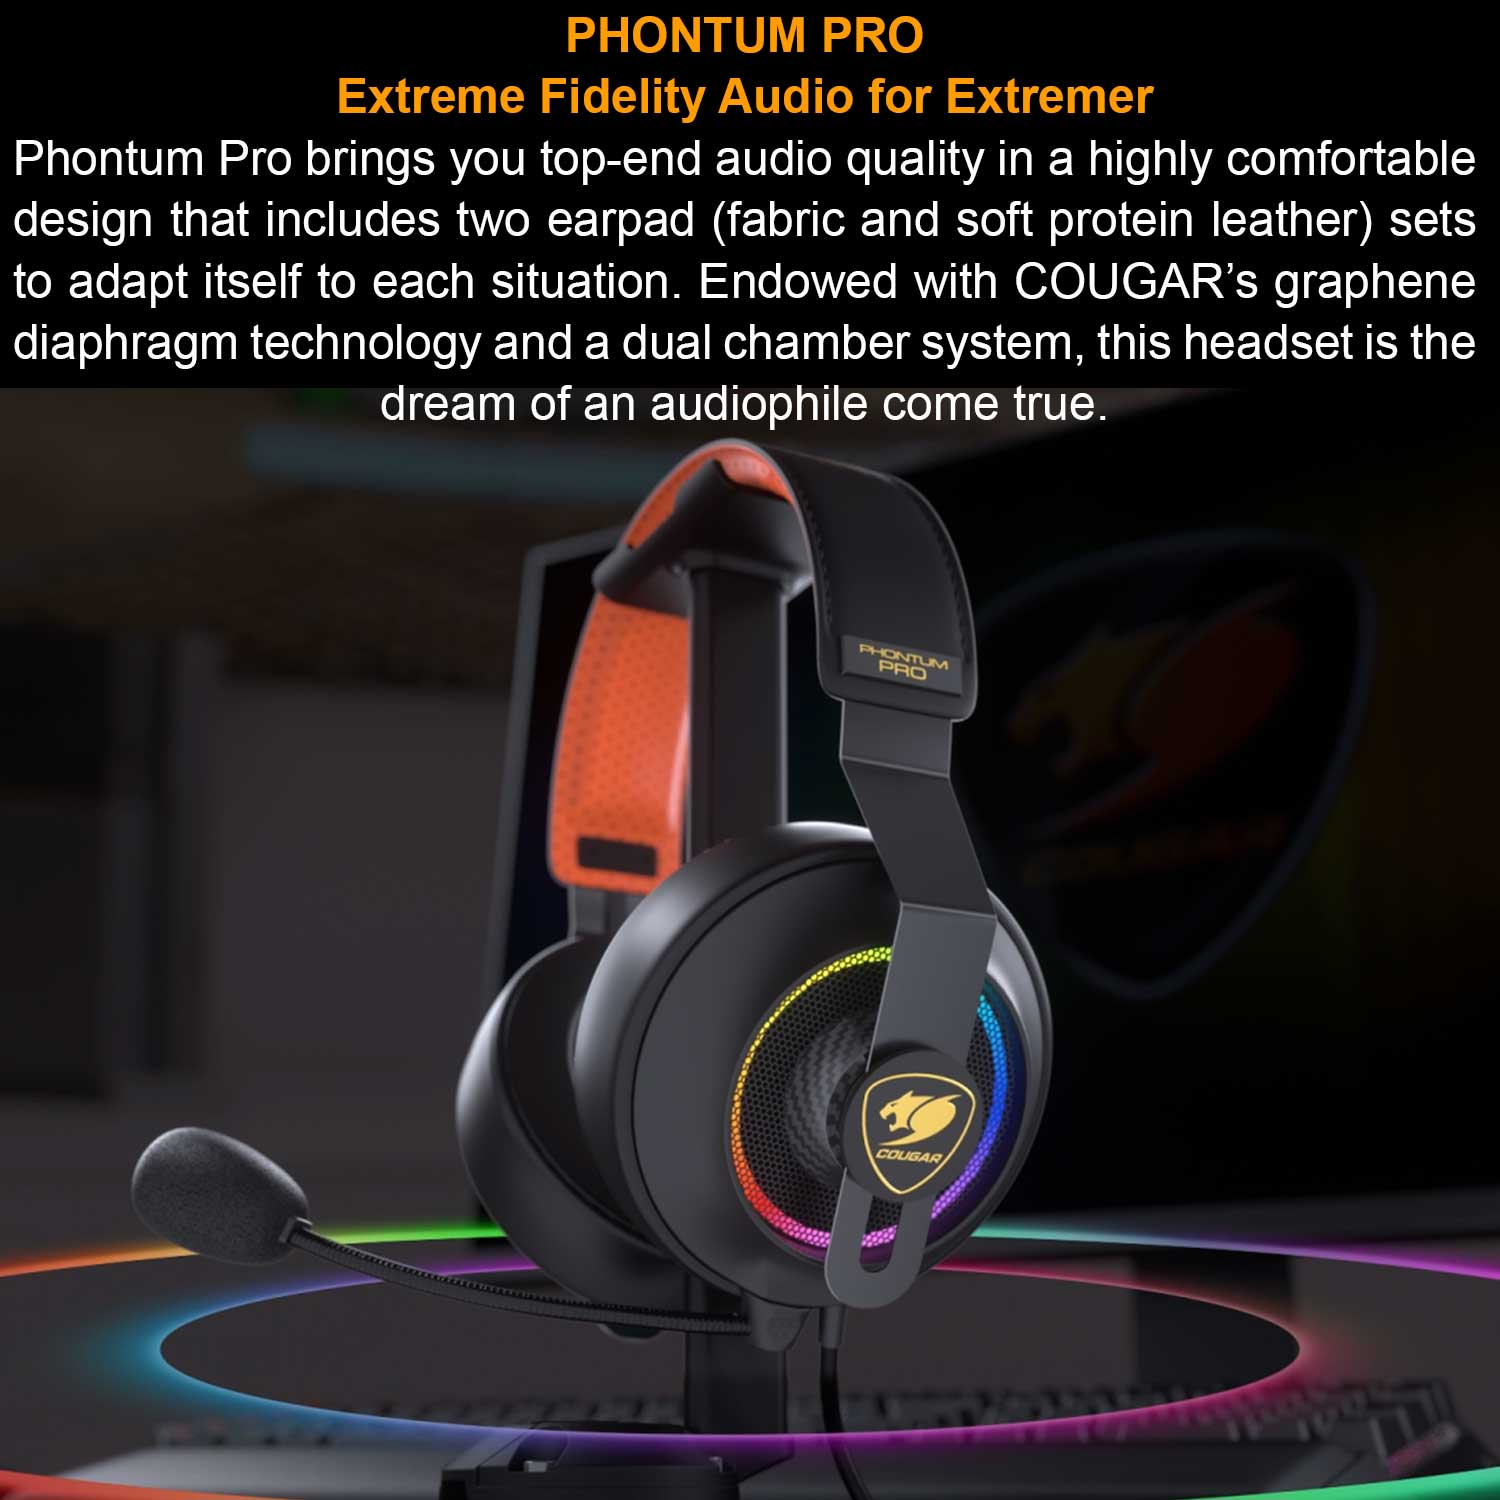 Cougar PHONTUM PRO Headset Extreme Fidelity Audio for Extremer - 3H800P53B.0001